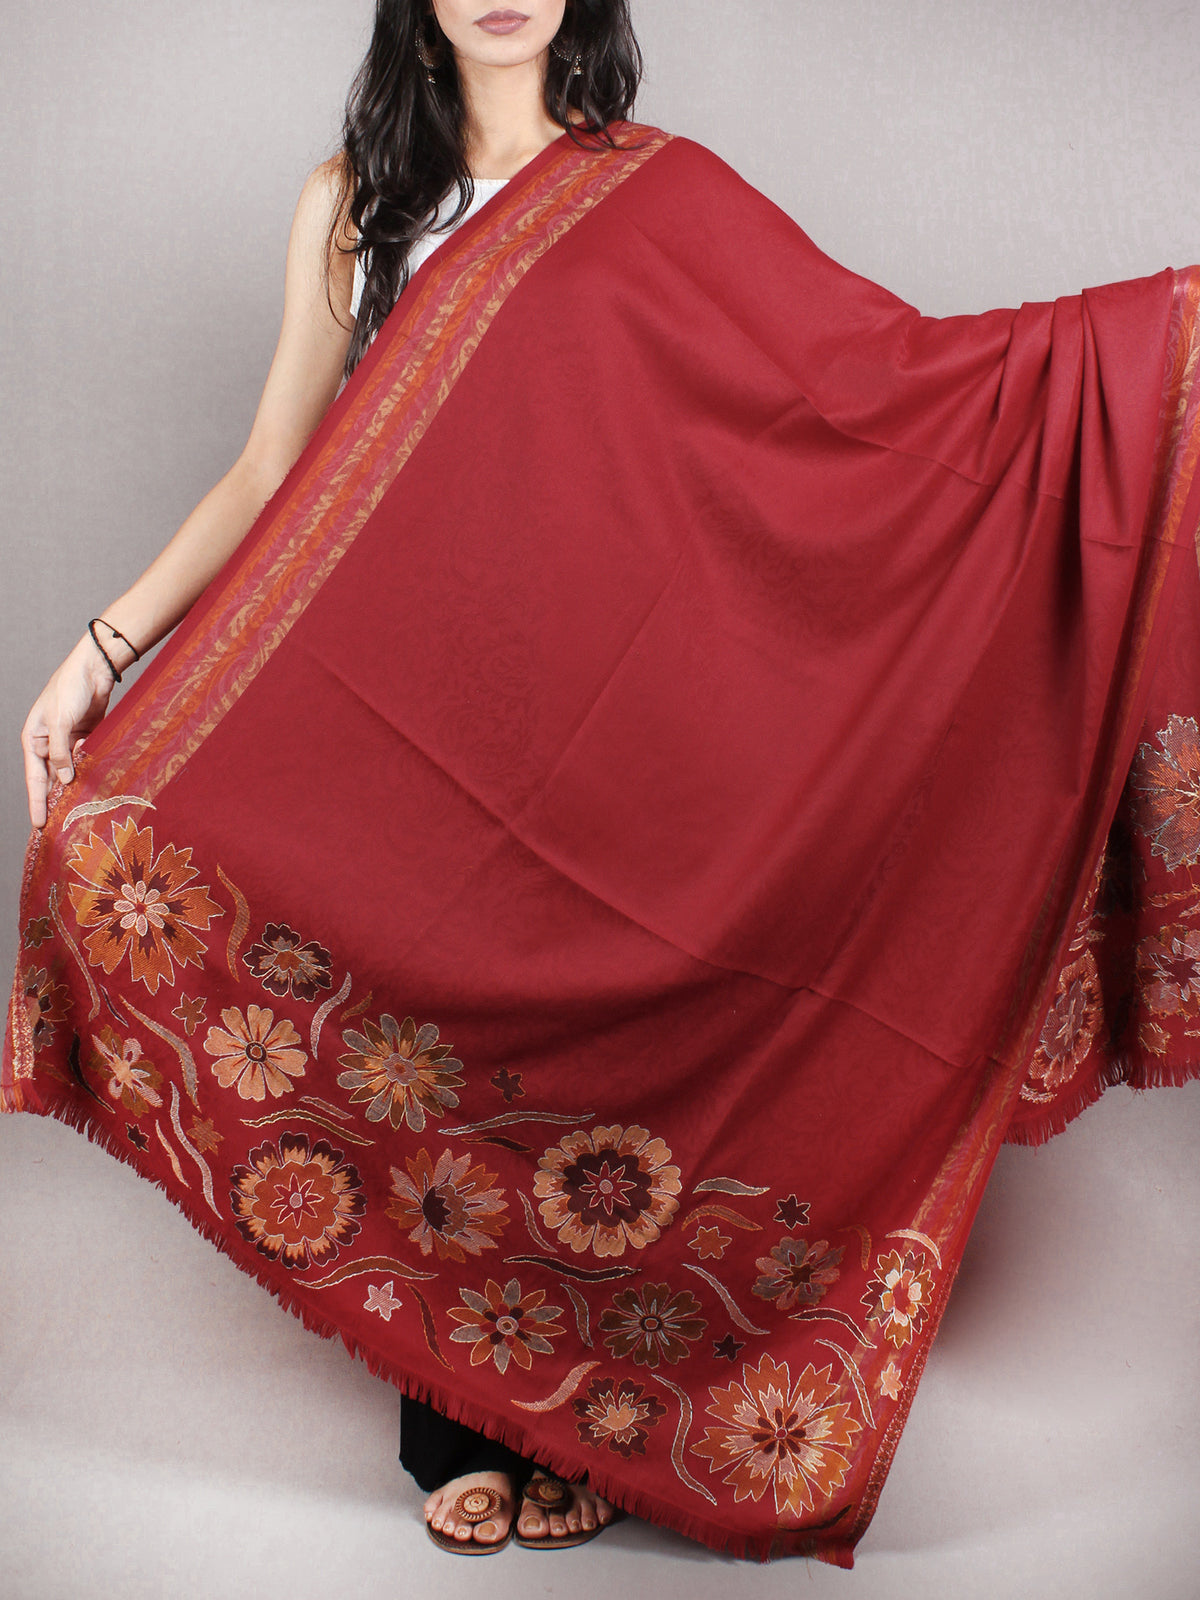 Maroon Brown Cashmere Shawl in Paisley-Self With Sozni Border From Kashmir - S200202